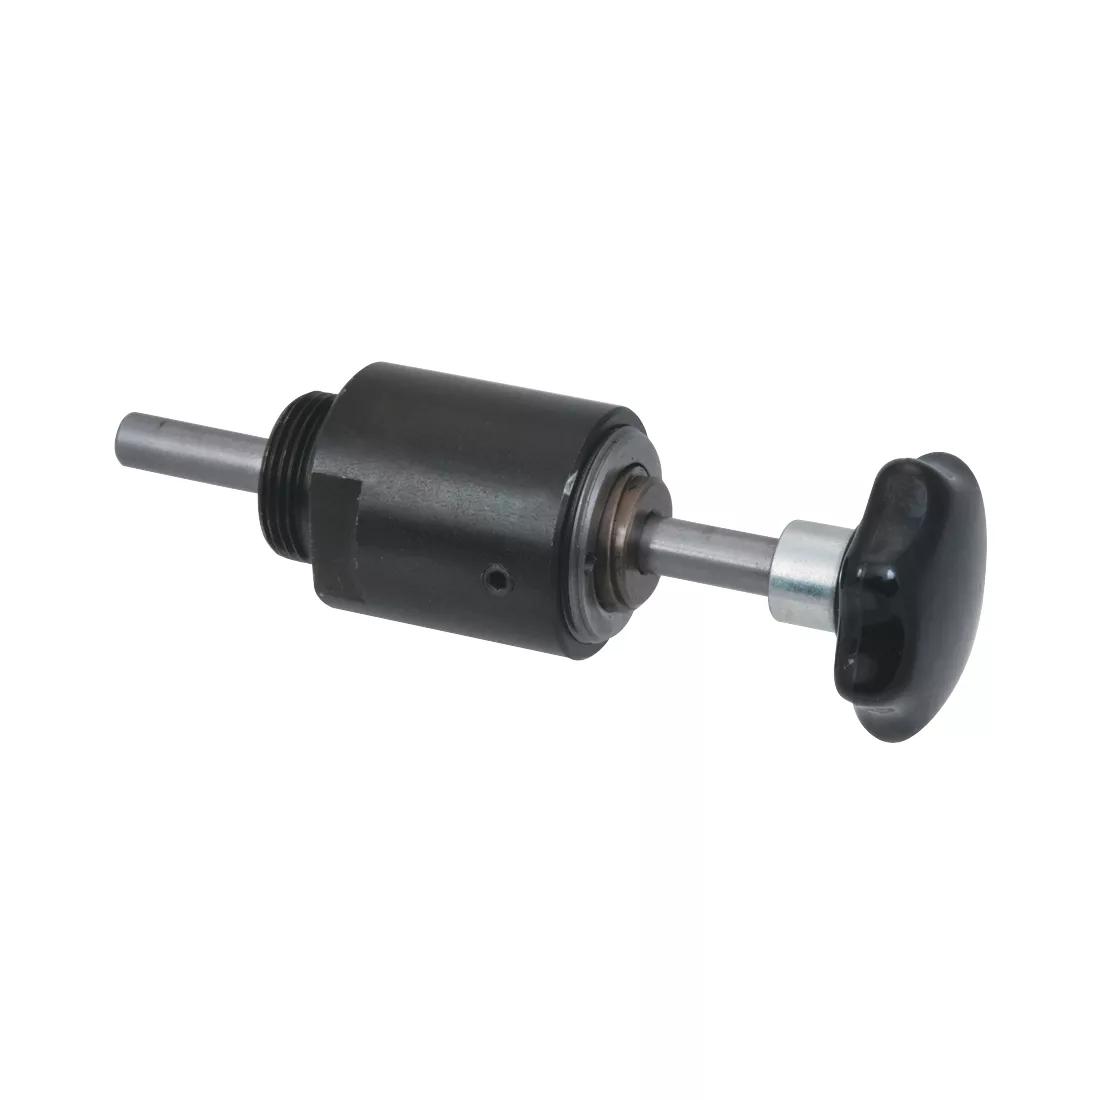 Through Hole Plunger Clamps | Reid Supply